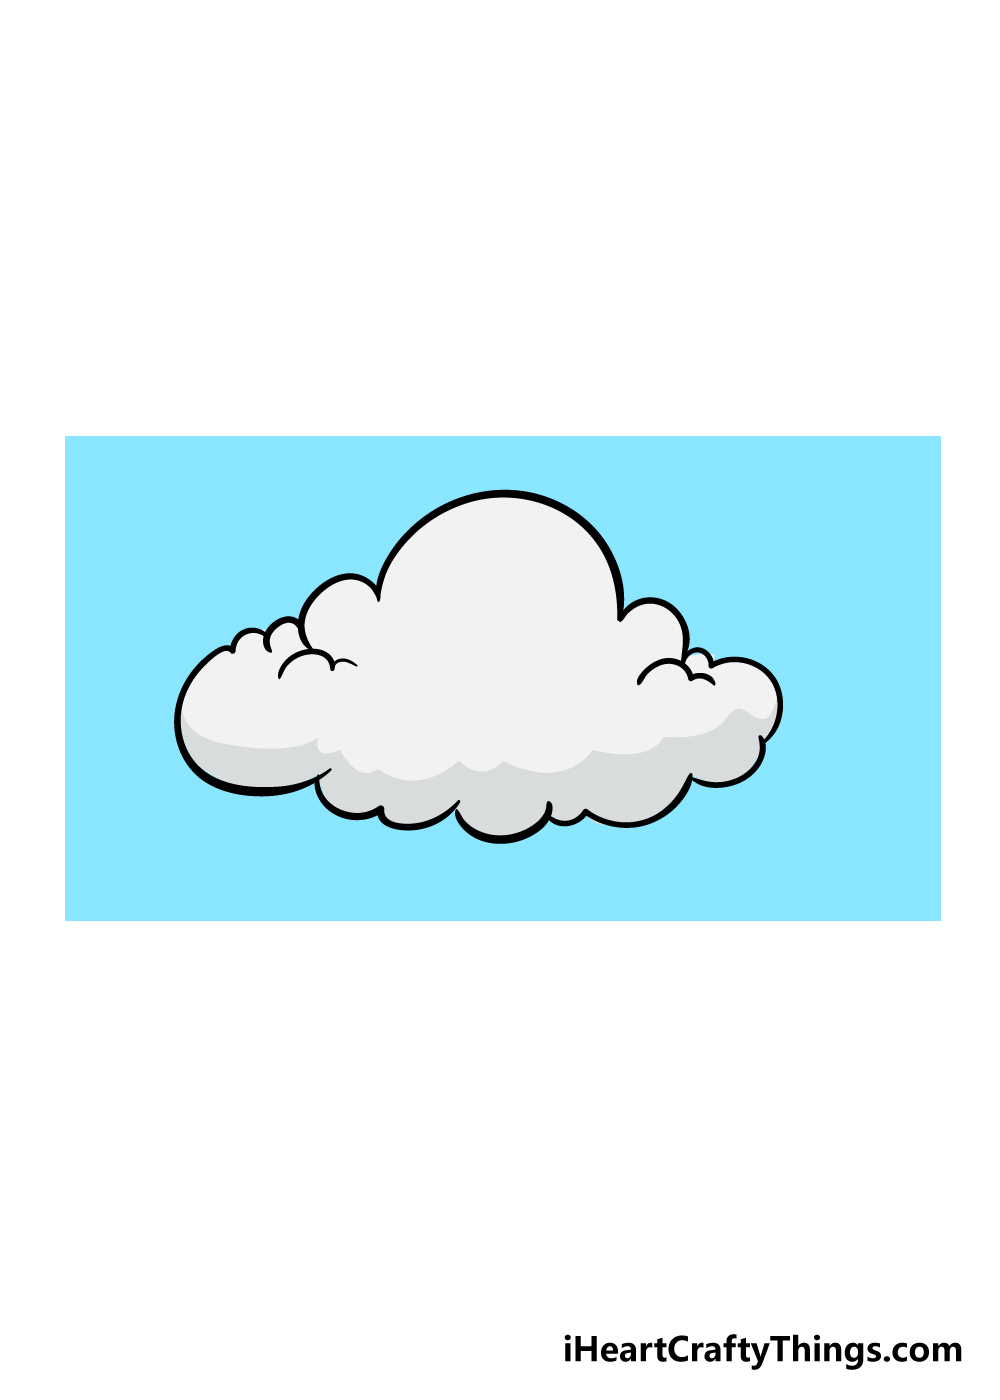 Cloud Drawing - How To Draw A Cloud Step By Step